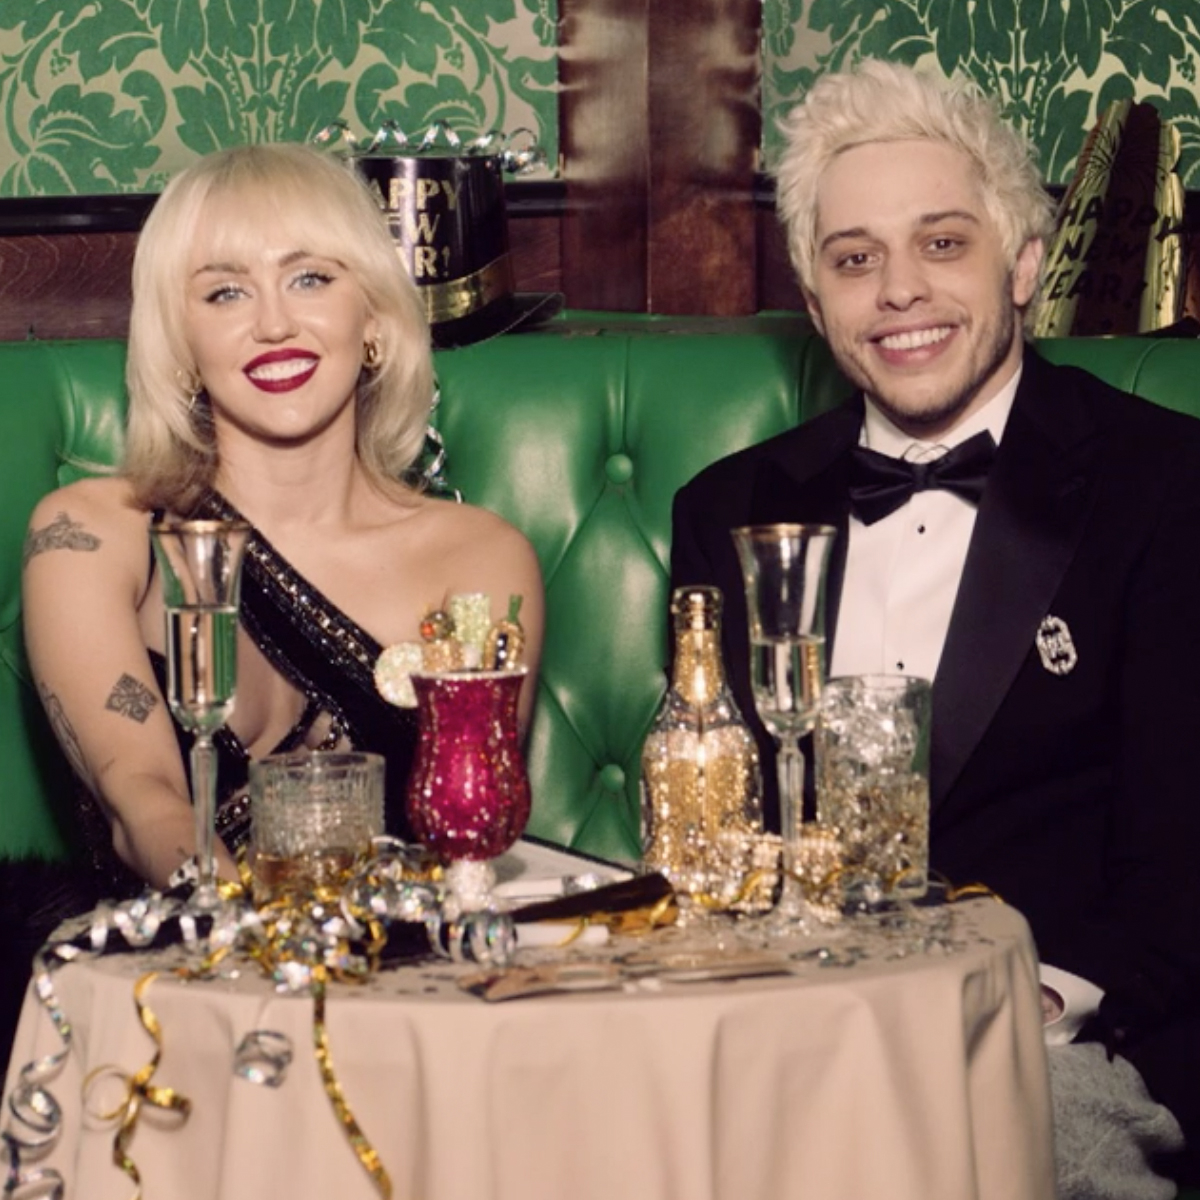 See a First Look at Miley Cyrus and Pete Davidson's "Untraditional" New Year's Eve Bash